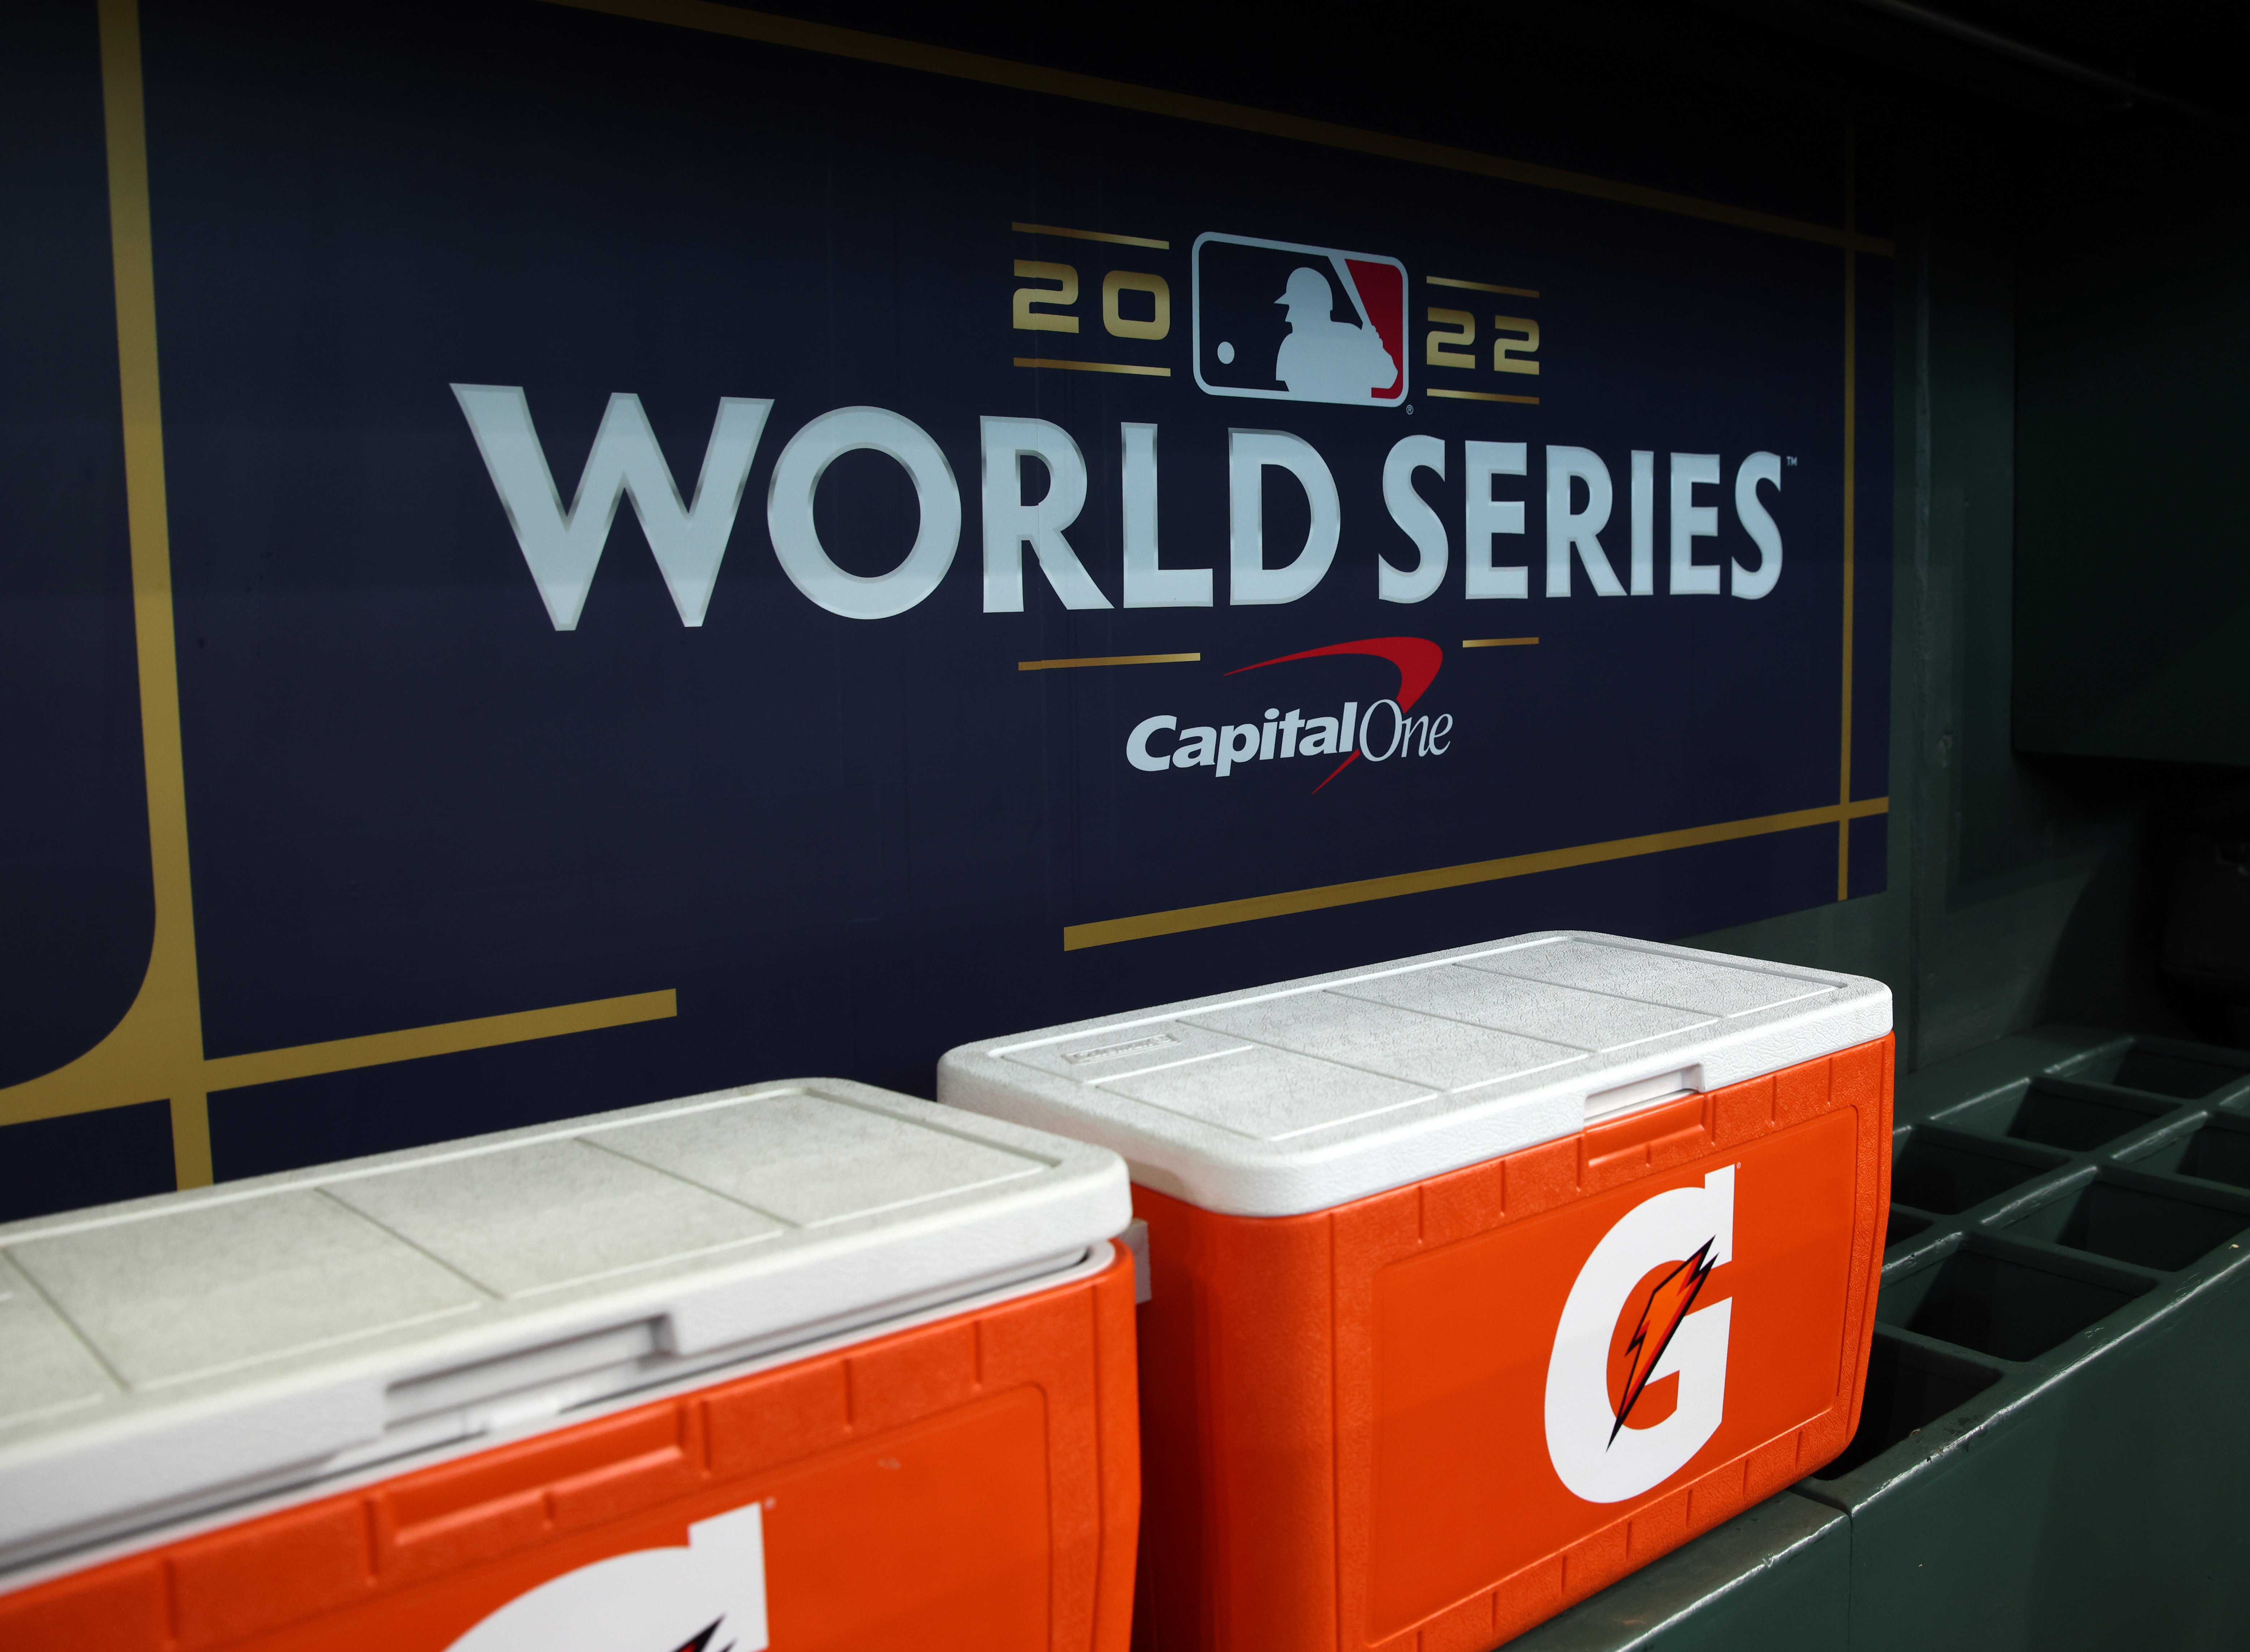 A detail shot of the World Series logo in the back of the dugout before Game 1 of the 2022 World Series between the Philadelphia Phillies and the Houston Astros at Minute Maid Park on Friday, October 28, 2022 in Houston, Texas.